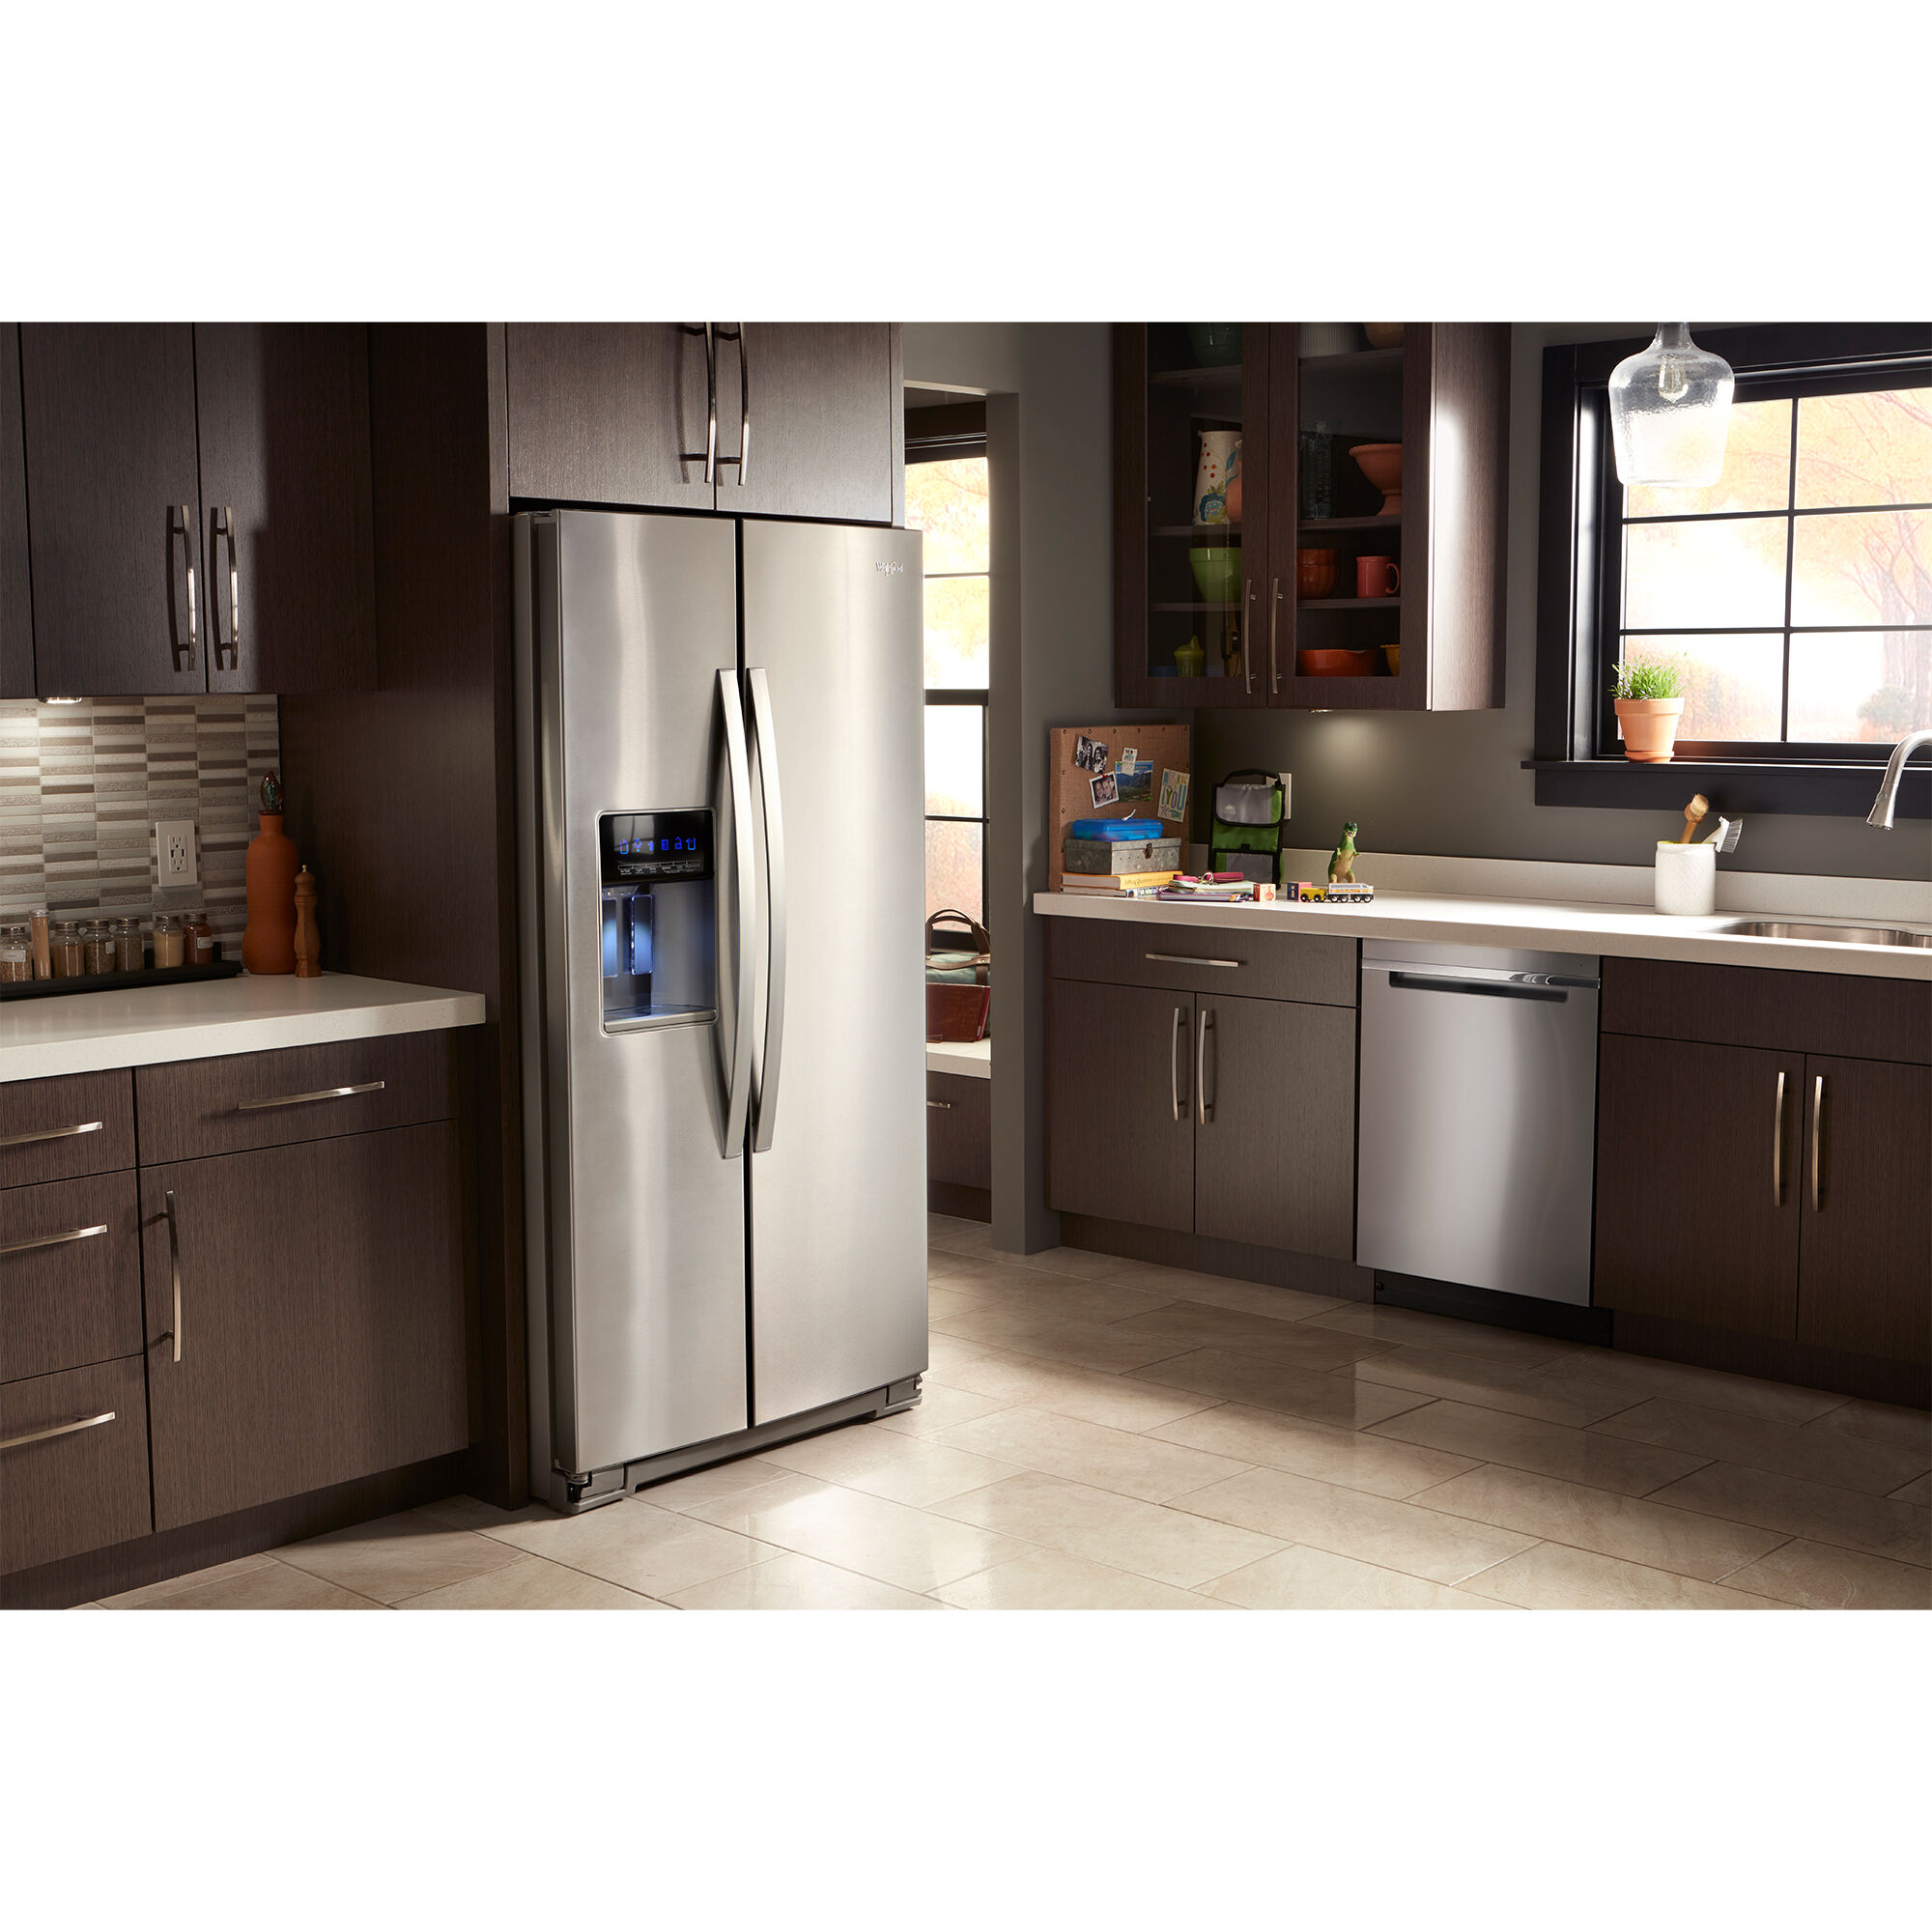 Whirlpool 36 in. 20.6 cu. ft. Counter Depth Side-by-Side